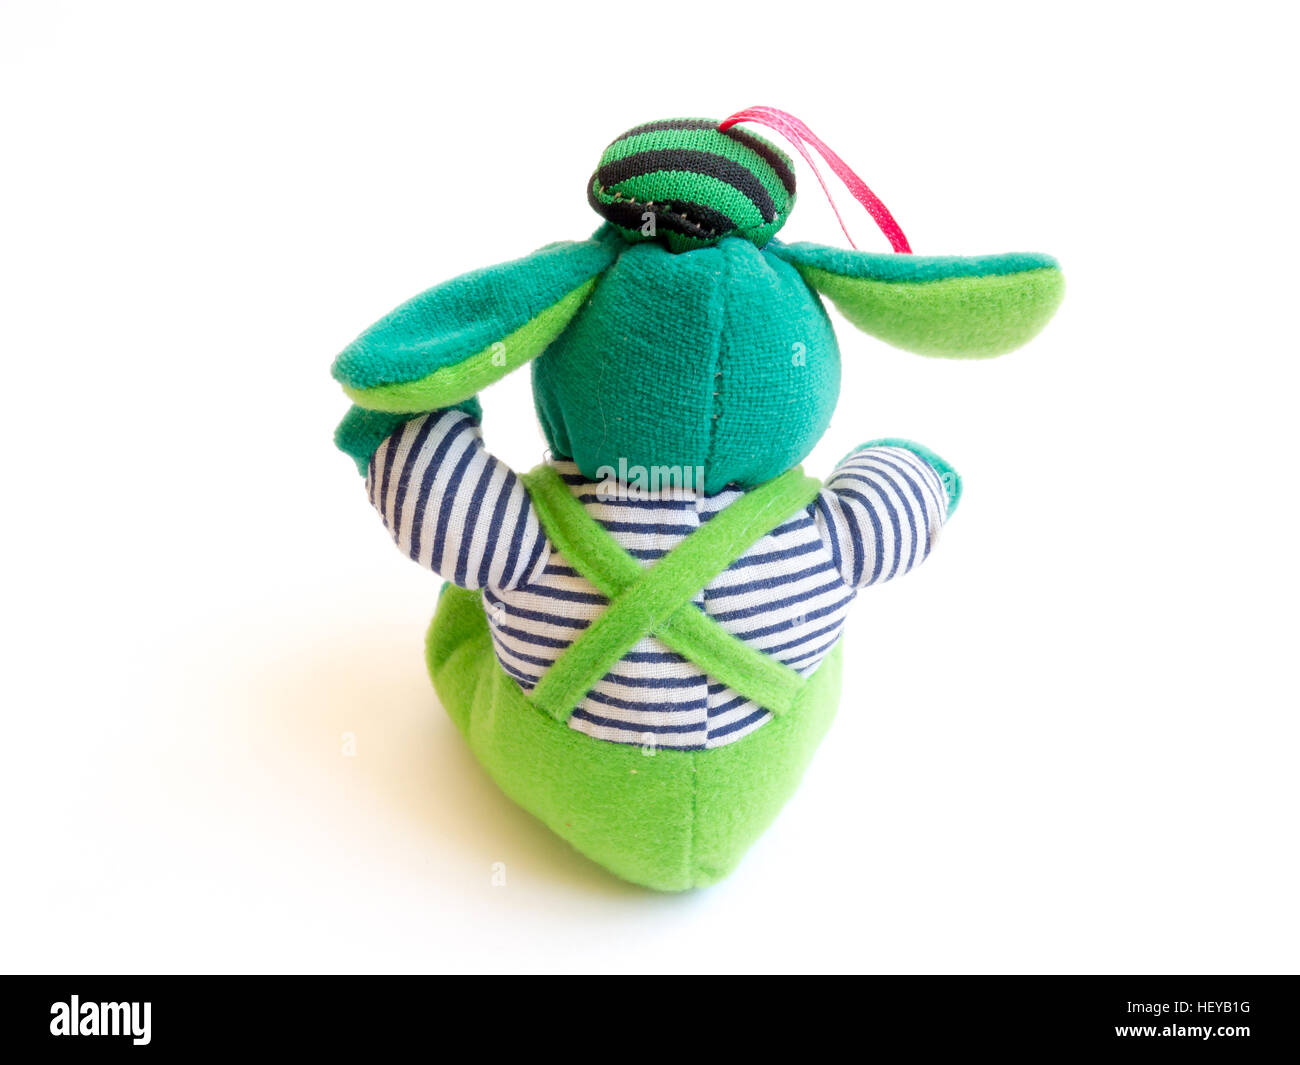 The Miniature green toy dog. Stock Photo